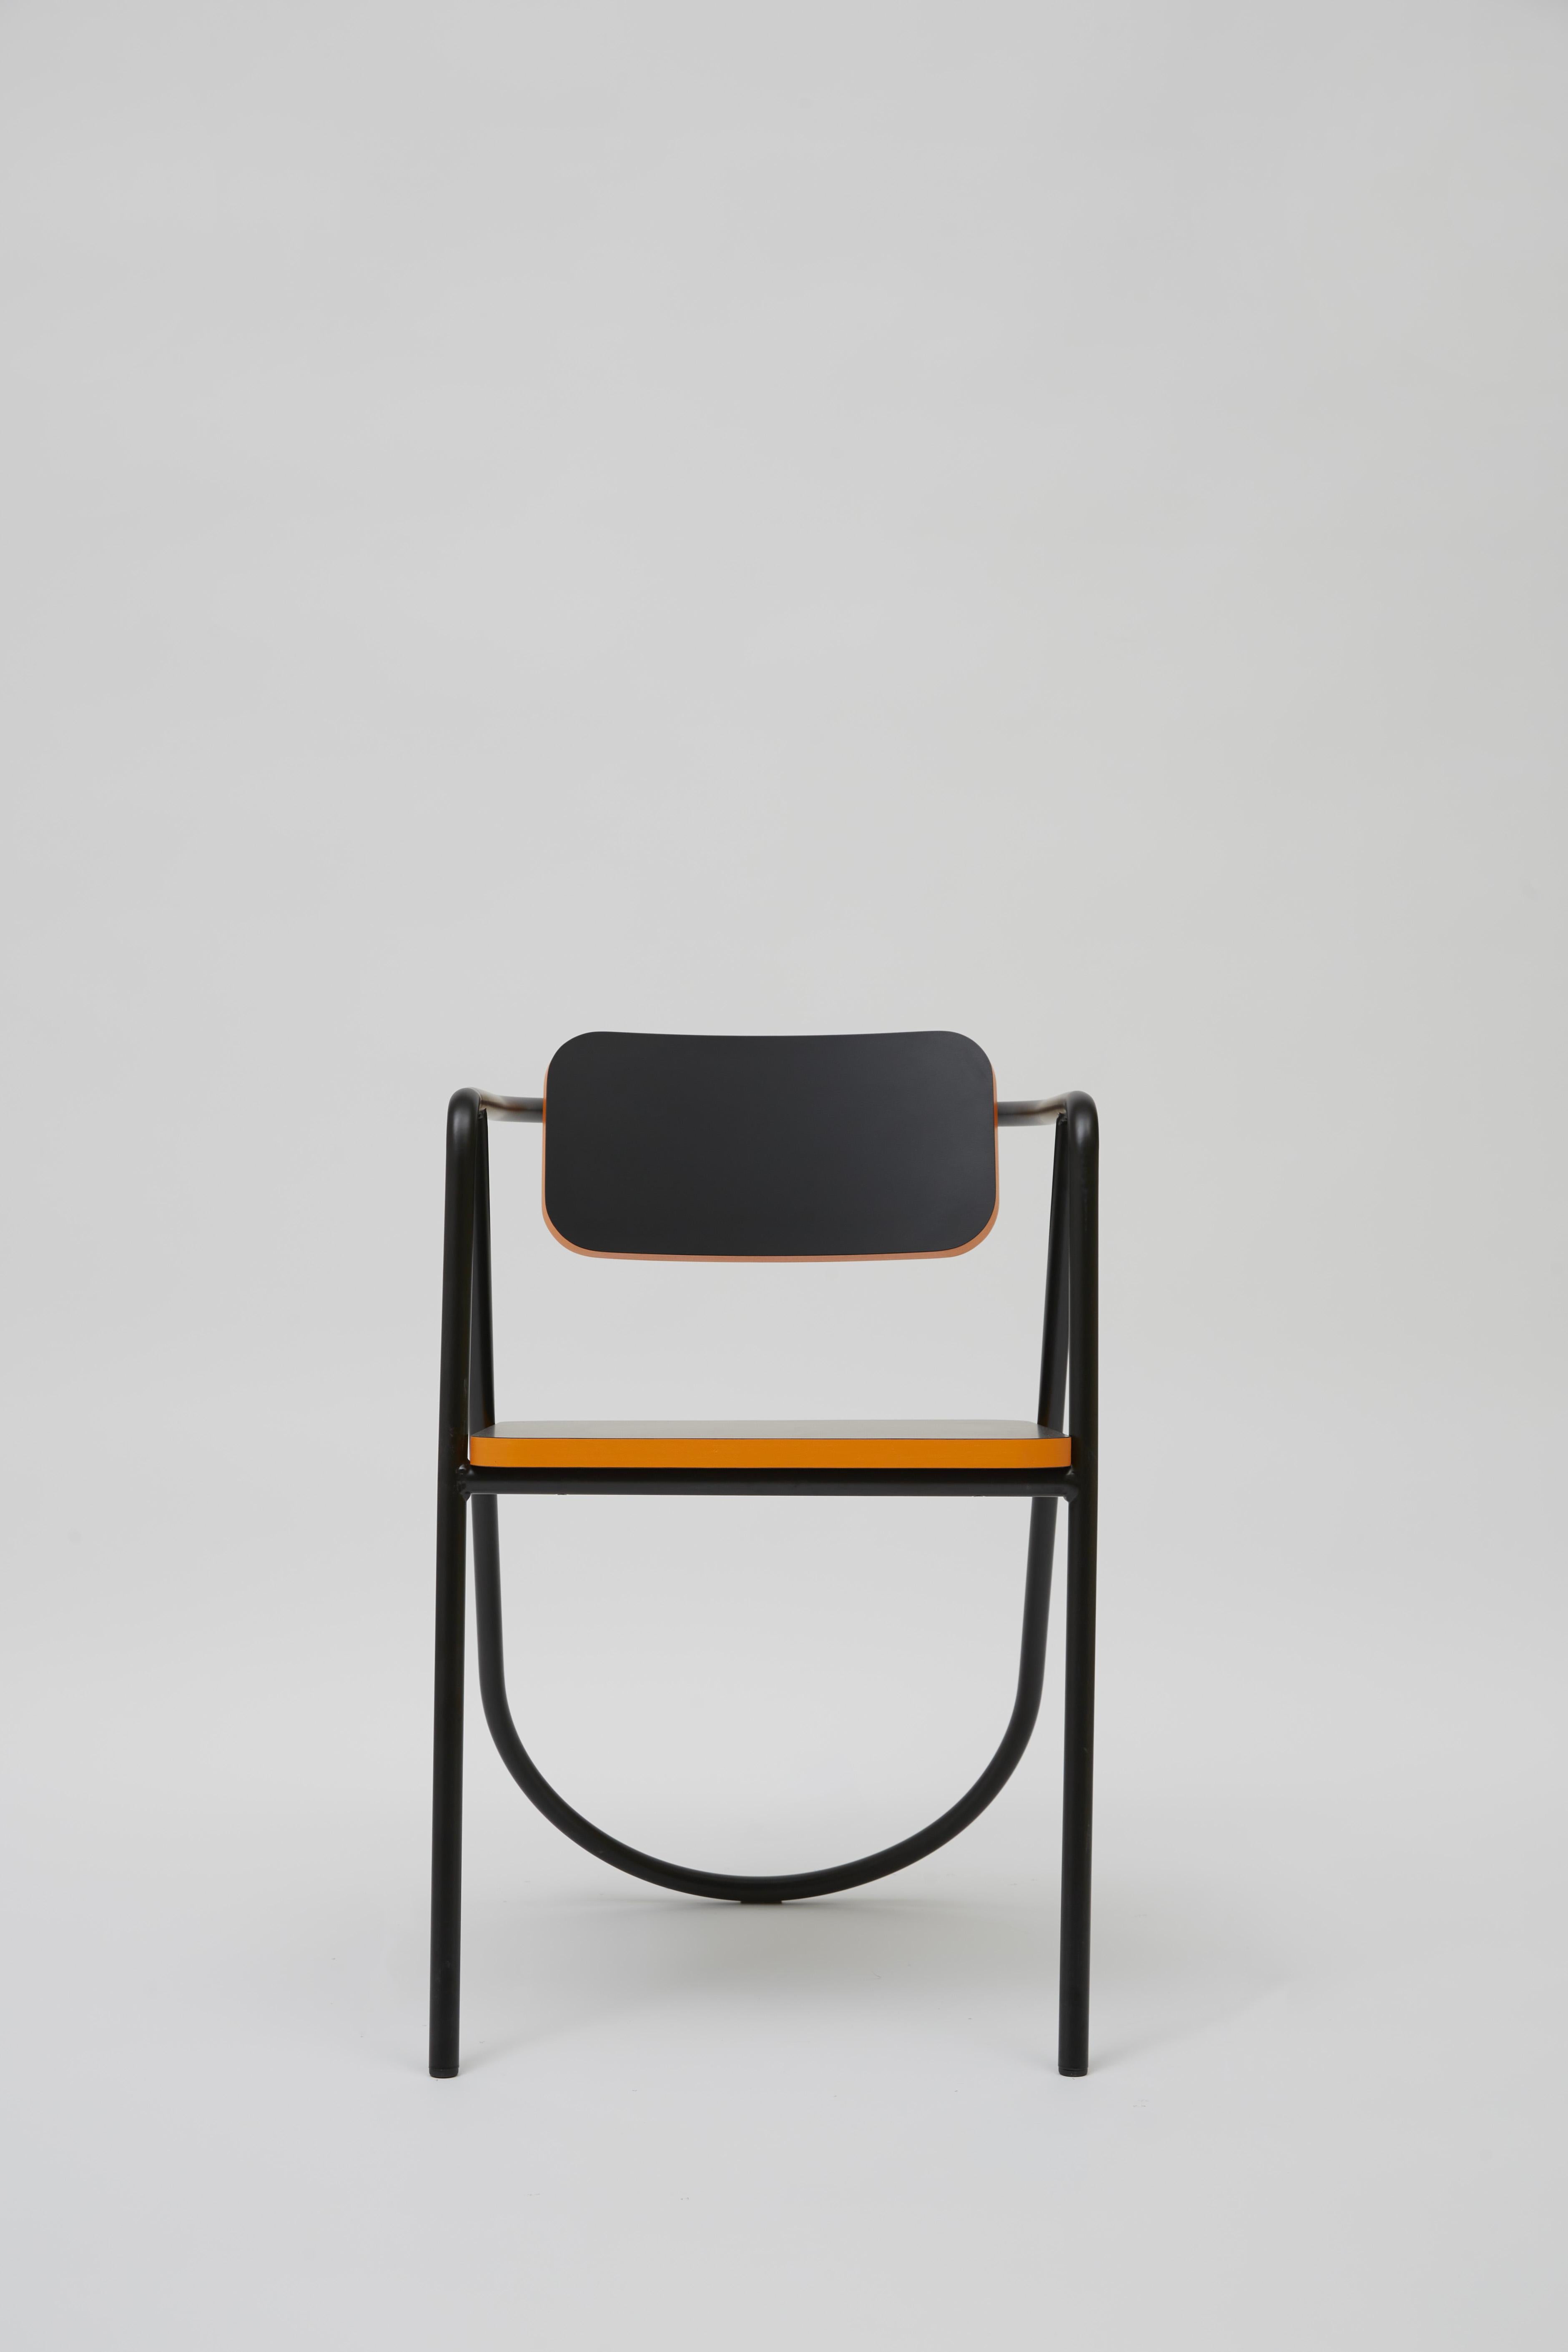 This splendid chair from La Misciù Collection reveals a strong chromatic palette of black and orange. The orange dynamic profiles stand out against this black chair.